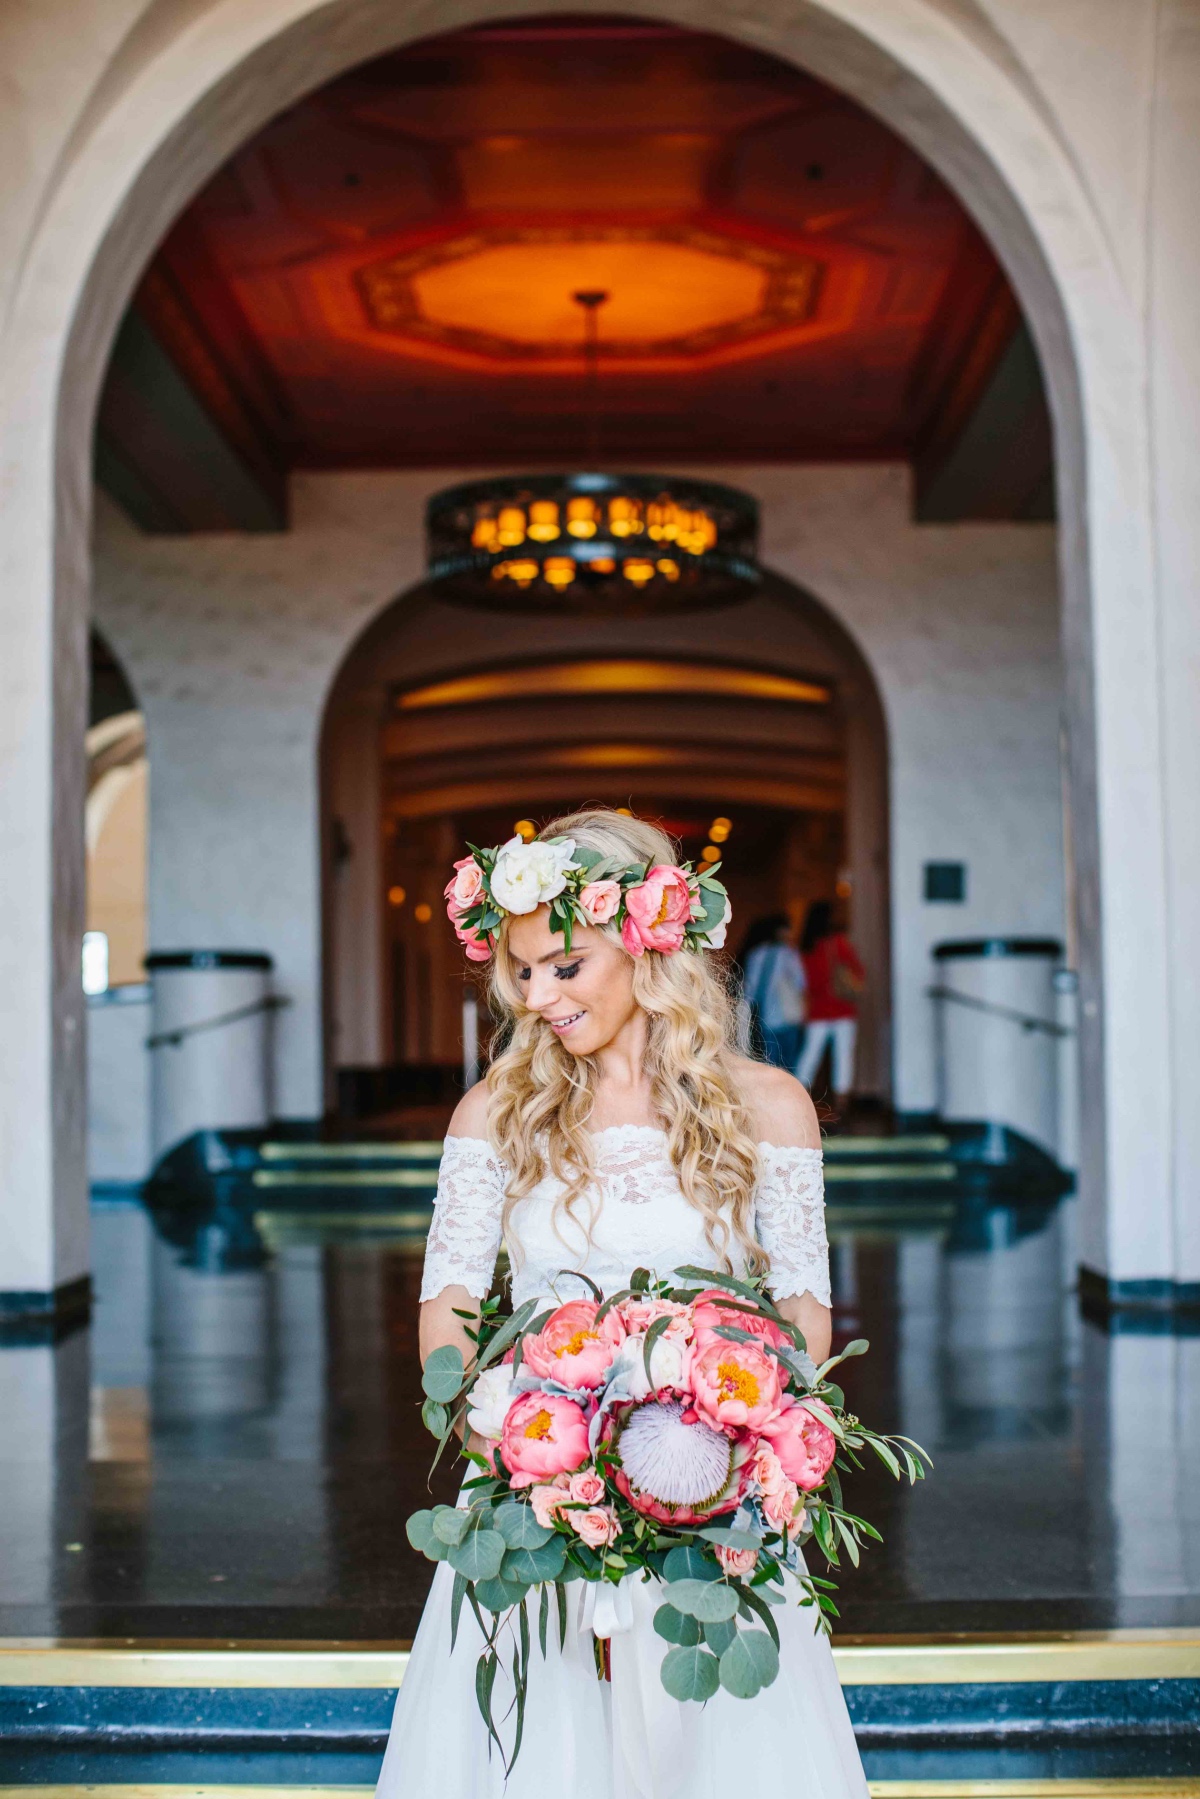 It's My Wedding Day Beaches! A Tropical Boho Wedding at the Iconic Pink Hotel of Waikiki.